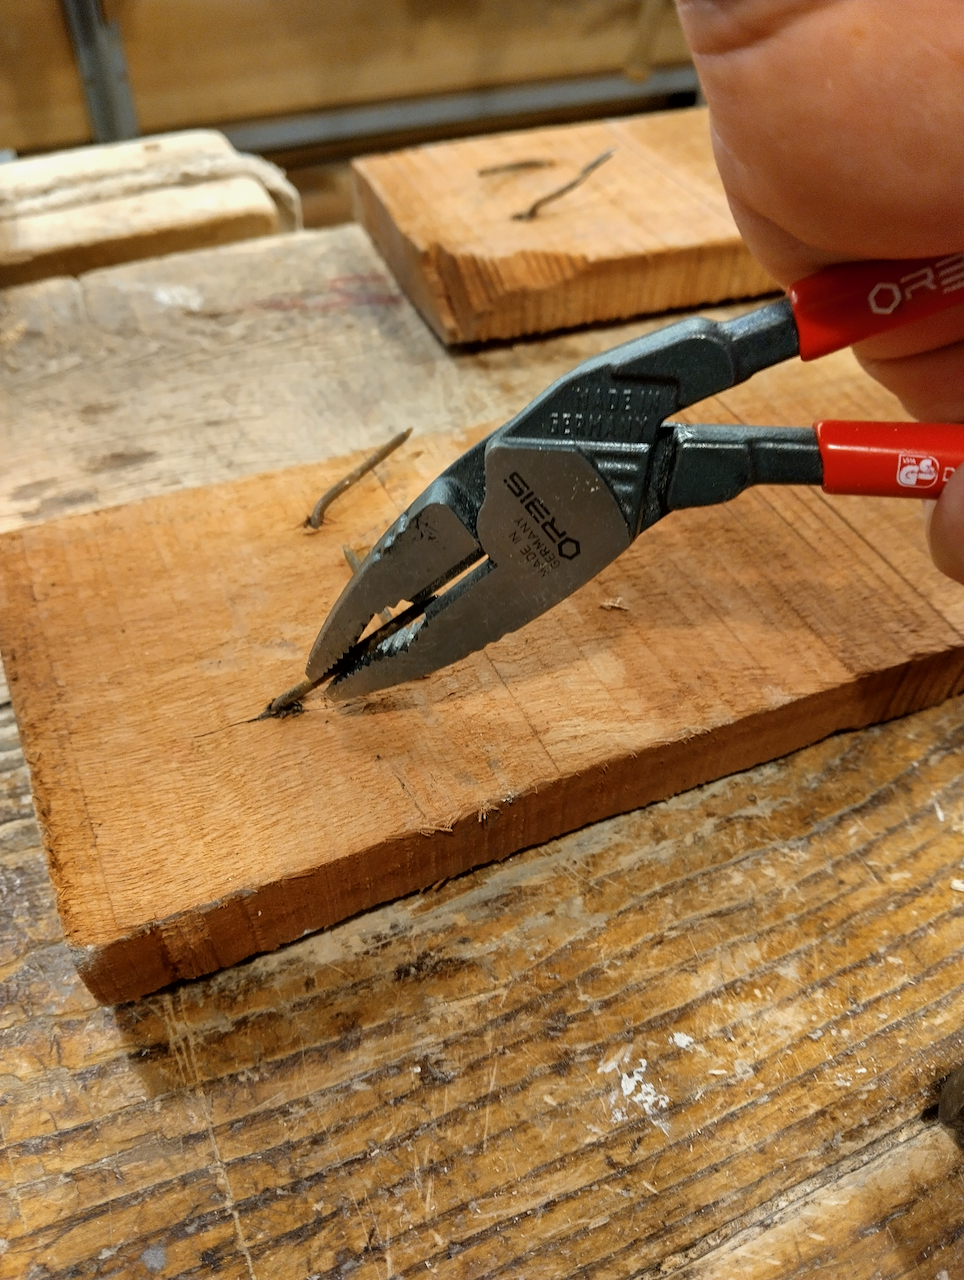 Yoav uses pliers to straighten a rusty nail.